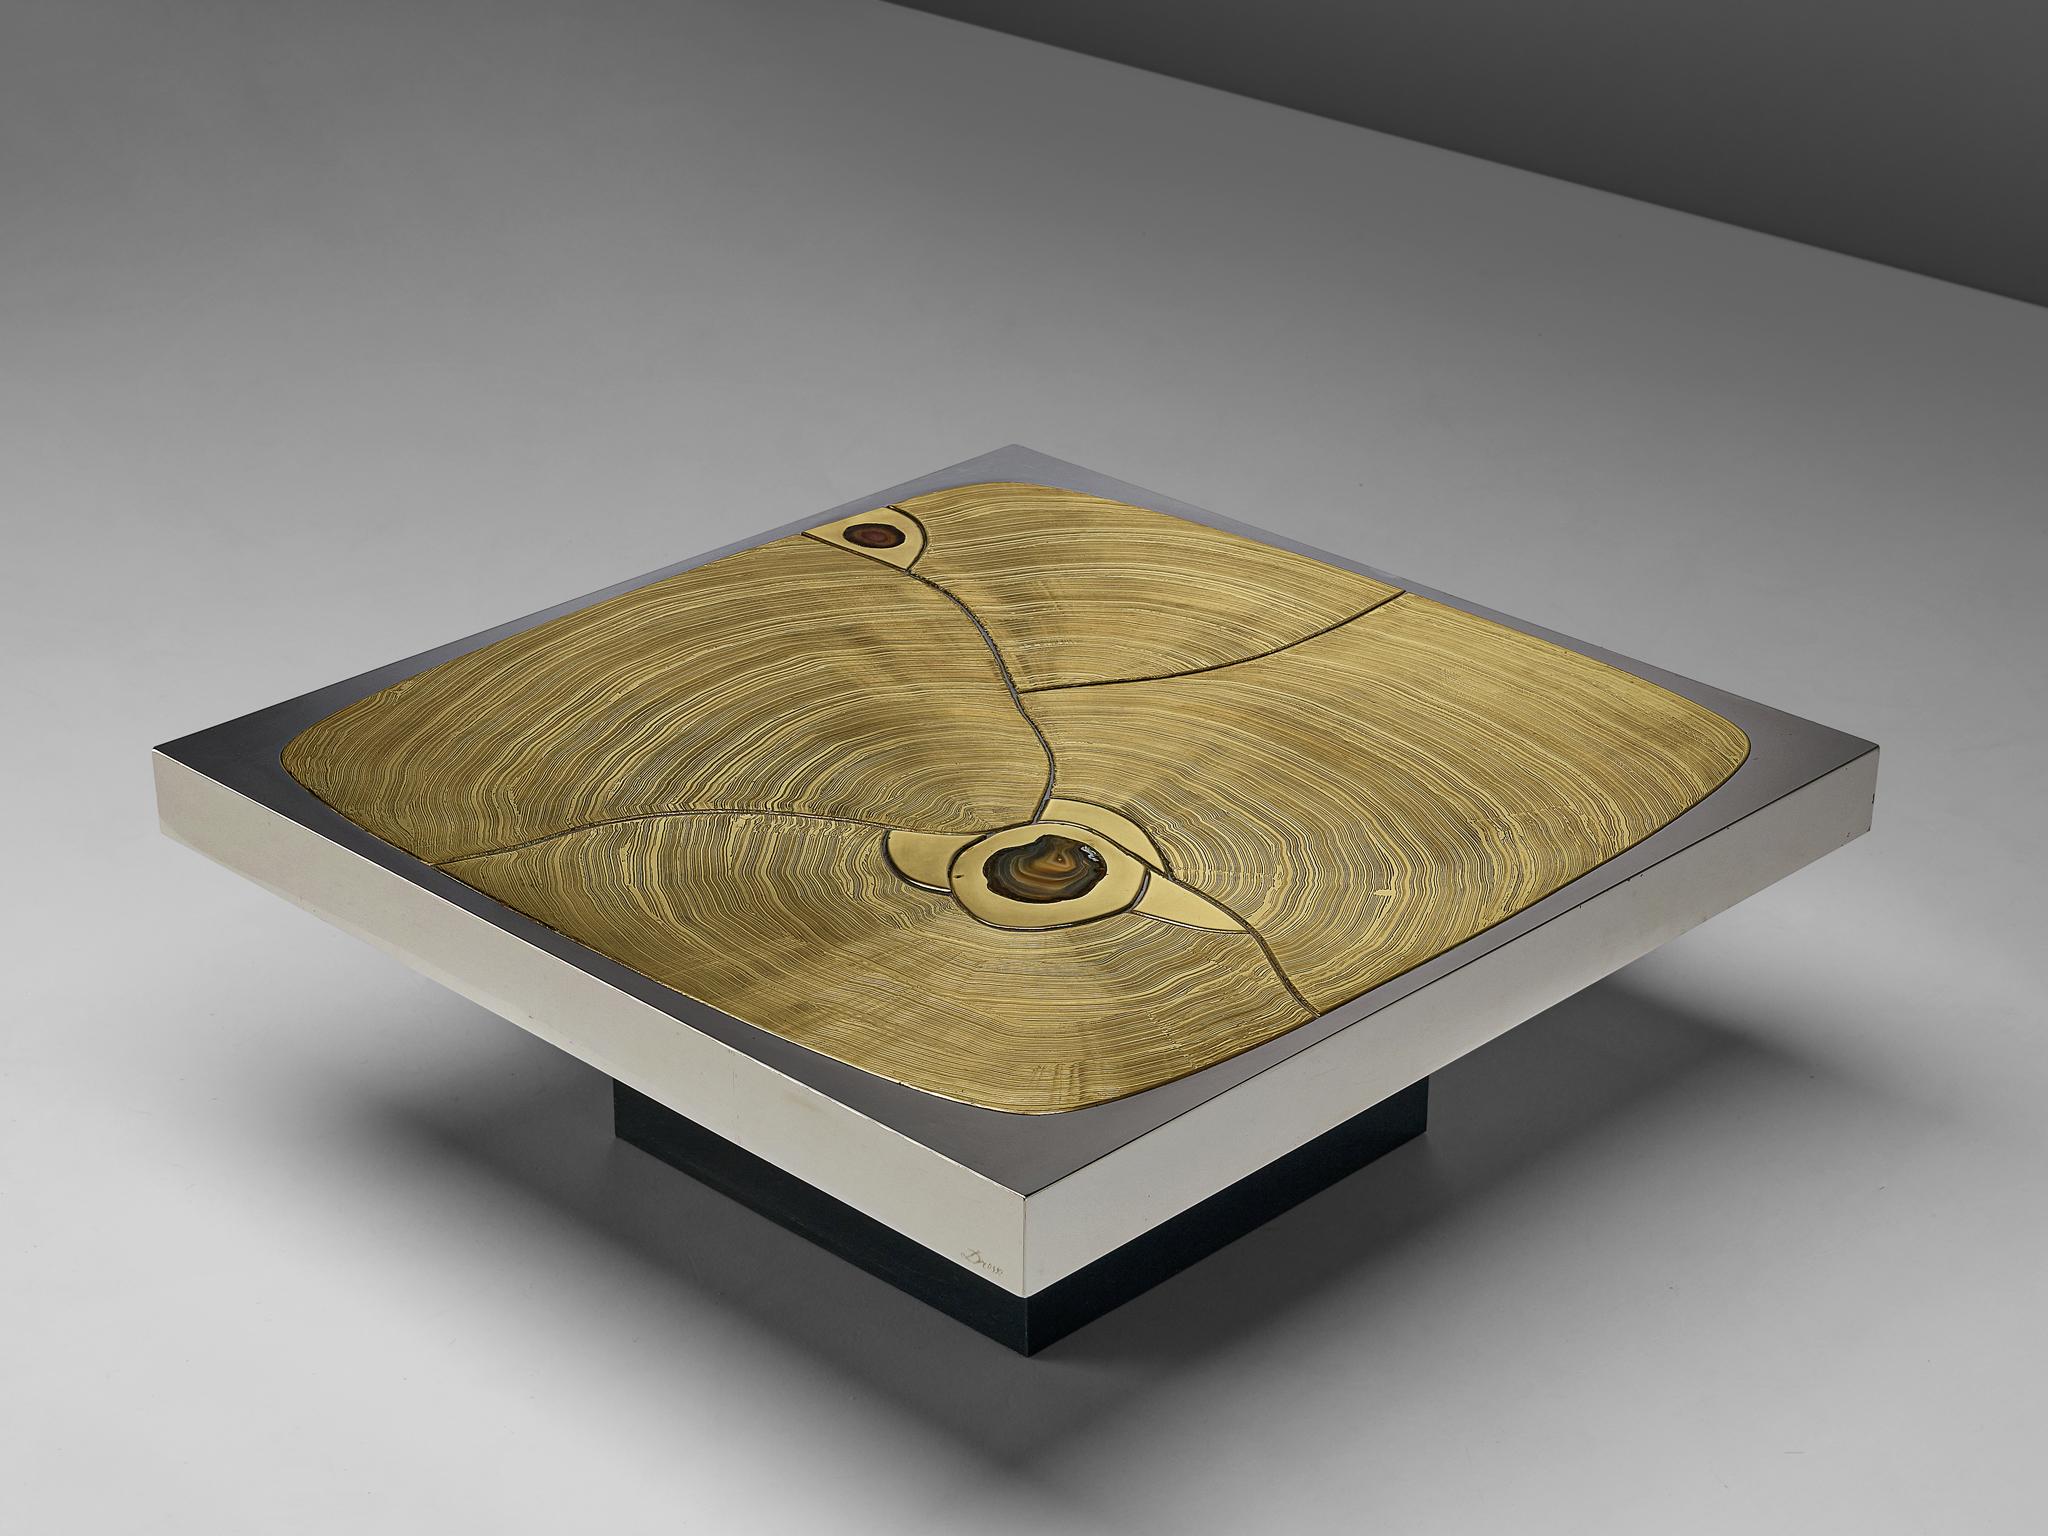 Jean Claude Dresse, coffee table, brass, steel, agate, metal, Belgium, 1970s

Square coffee table with striking tabletop designed by Jean Clause Dresse in the 1970s. Dresse is known for his bold designs, this table is no exception. A fragmented